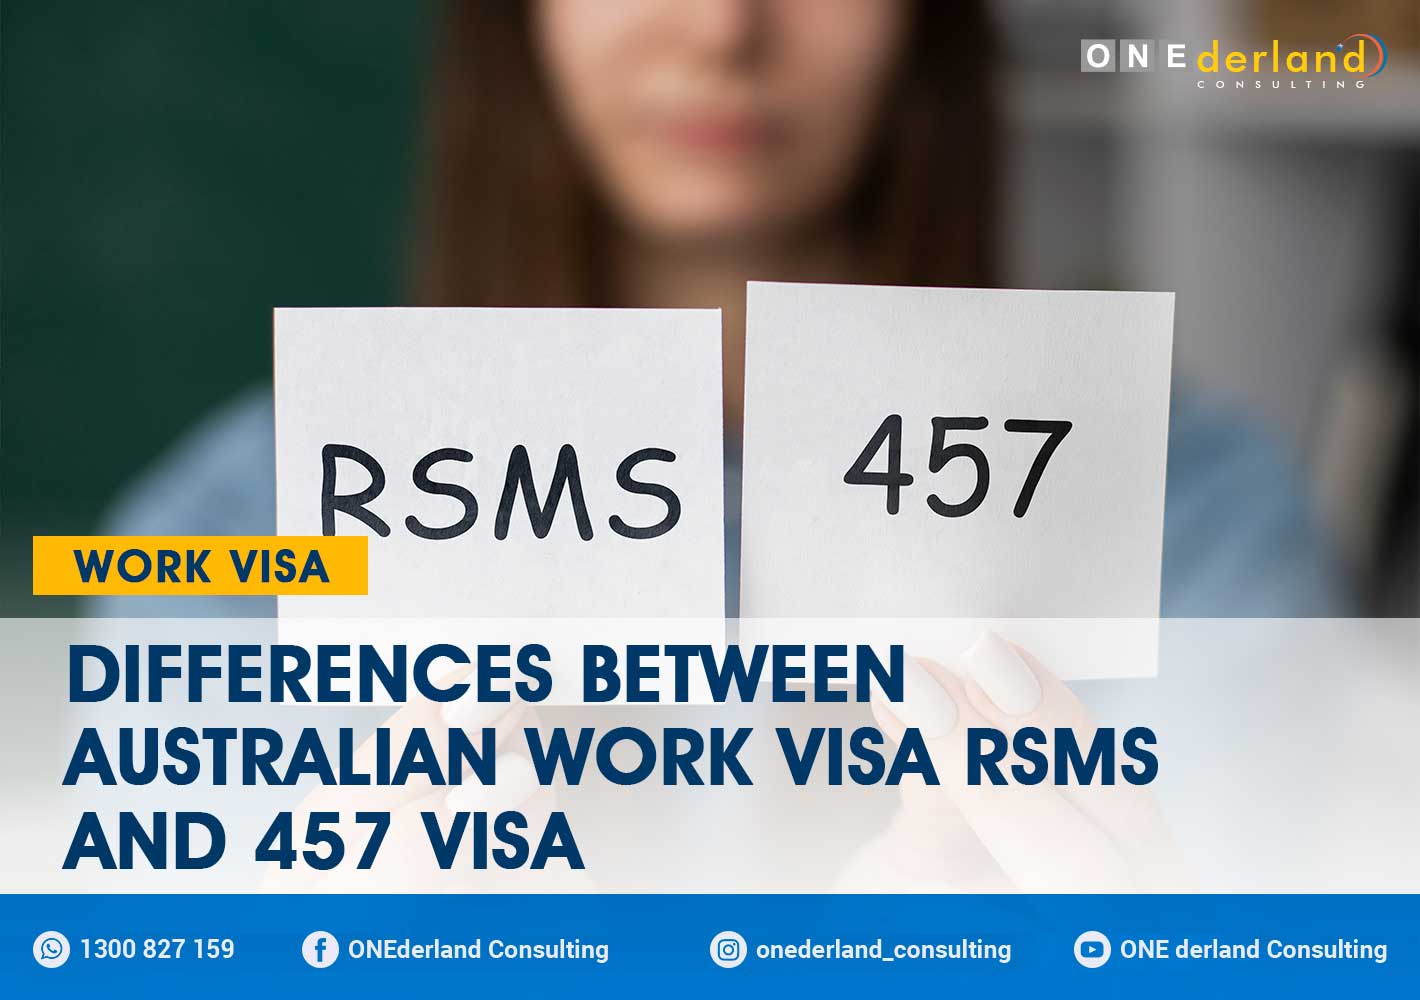 difference between 457 and rsms